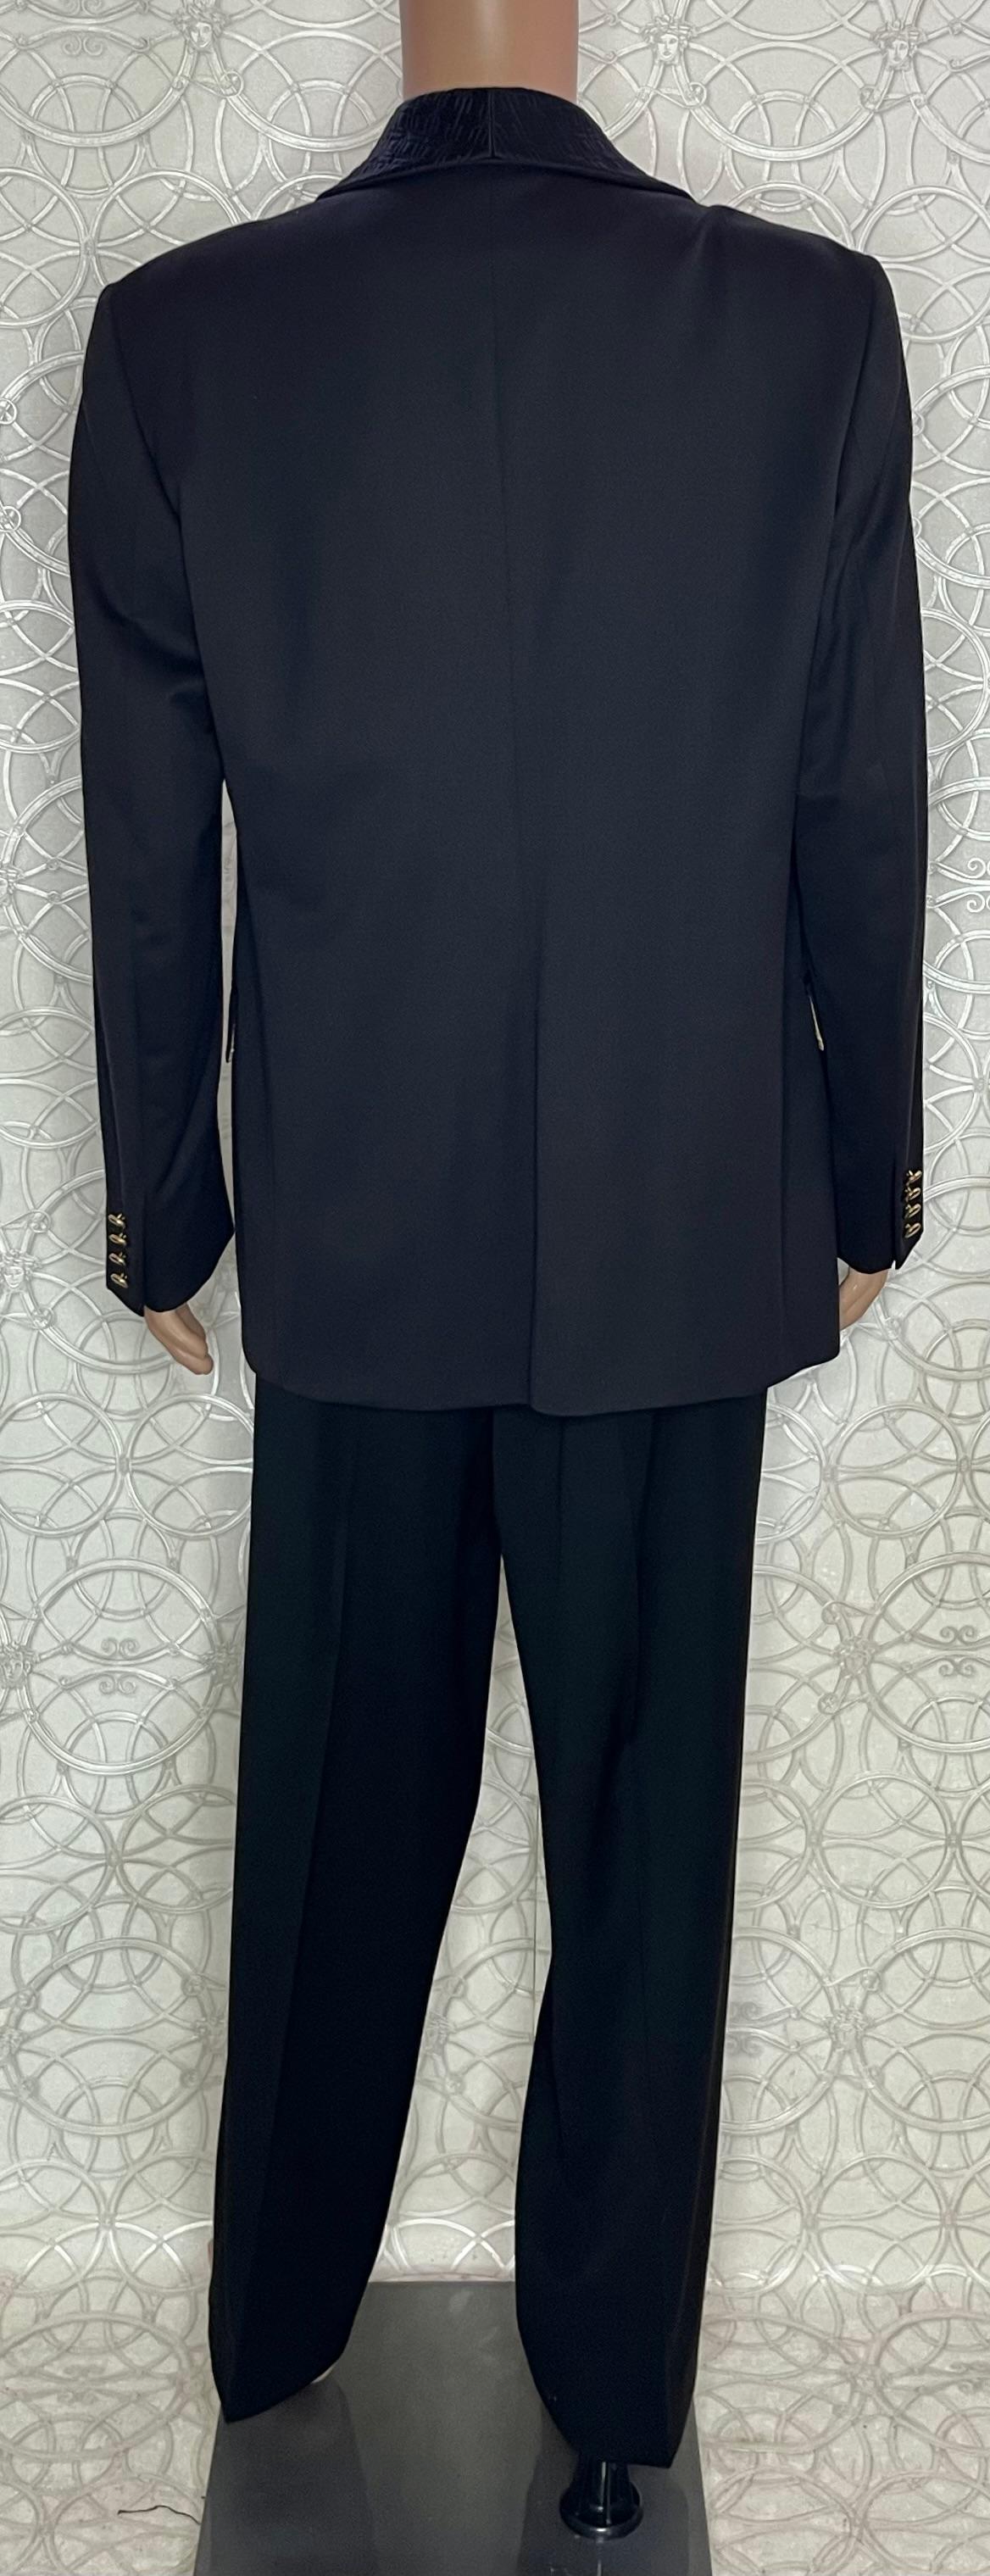 GIANNI VERSACE BLACK WOOL SUIT Size 56 - 46 (3XL) In New Condition For Sale In Montgomery, TX